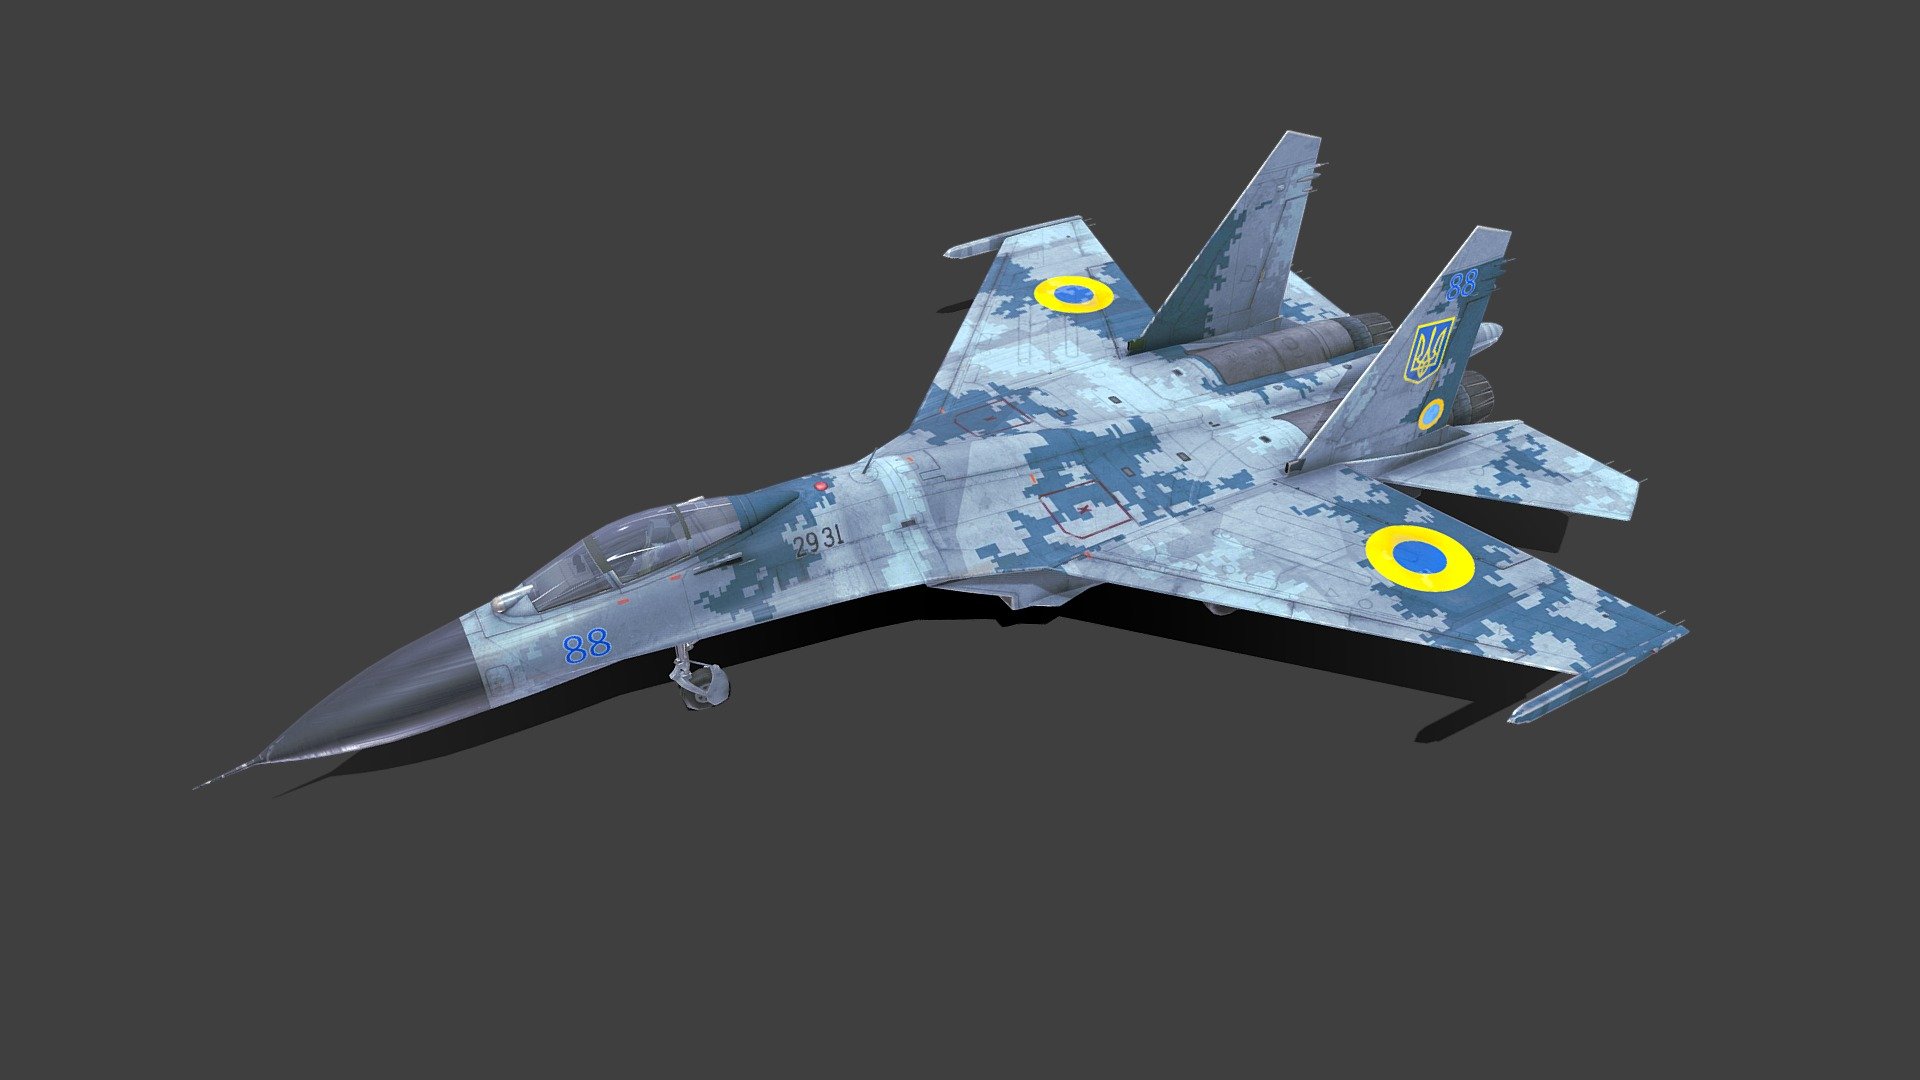 Sukhoi Su-27P Ukrainian Fighter Jet



-Low-poly ready to use in Games

-Textures are in PNG format 4k 1 set and 2k 1 set

-Files unit: Centimeters.

-15 objects Separate objects for animation.

-Available formats:MAX 2018 and 2015, OBJ, MTL, FBX, .tbscene.

-If you need any other file format you can always request
 - Sukhoi Su-27P Ukrainian Fighter Jet - Buy Royalty Free 3D model by MaX3Dd 3d model